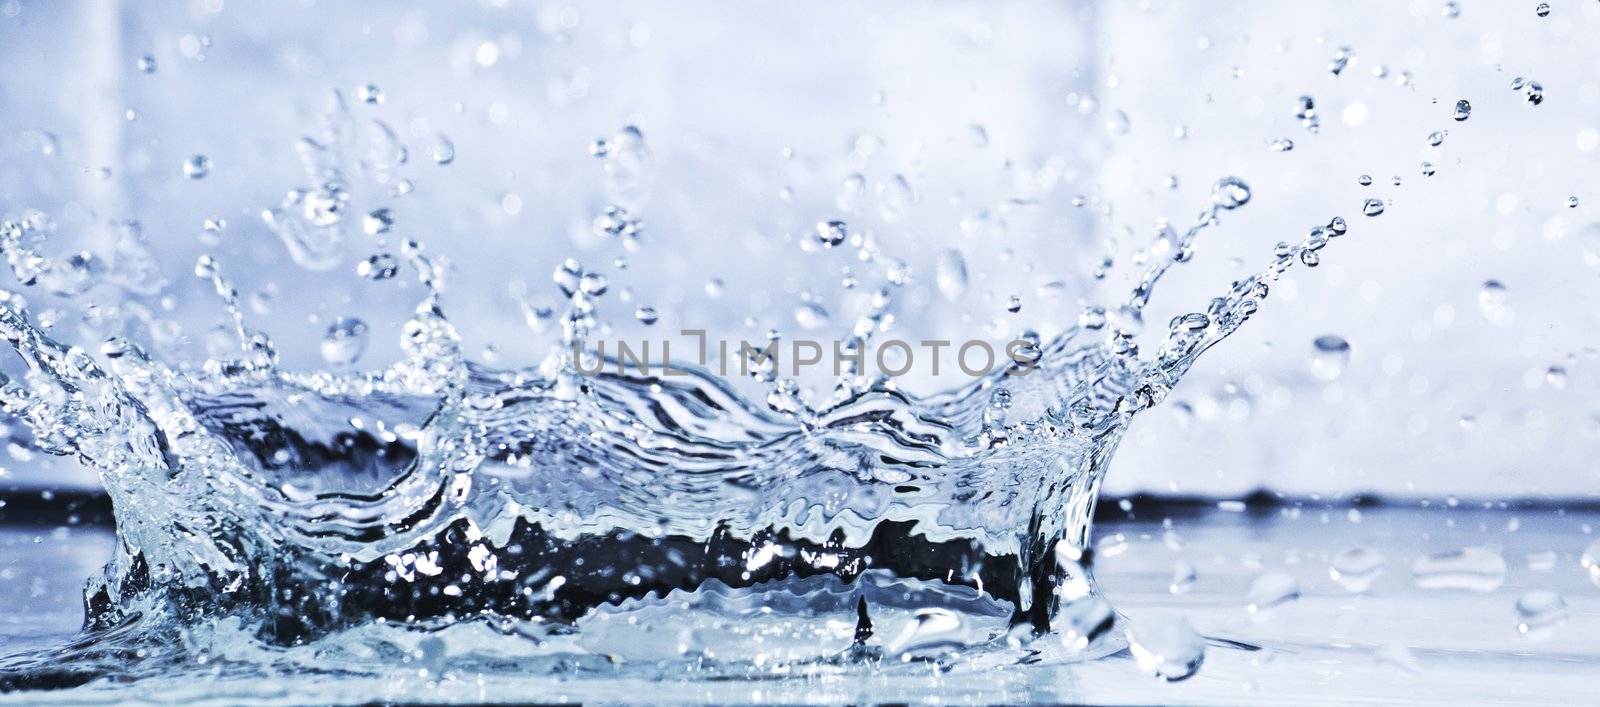 water splash isolated on white by ozaiachin